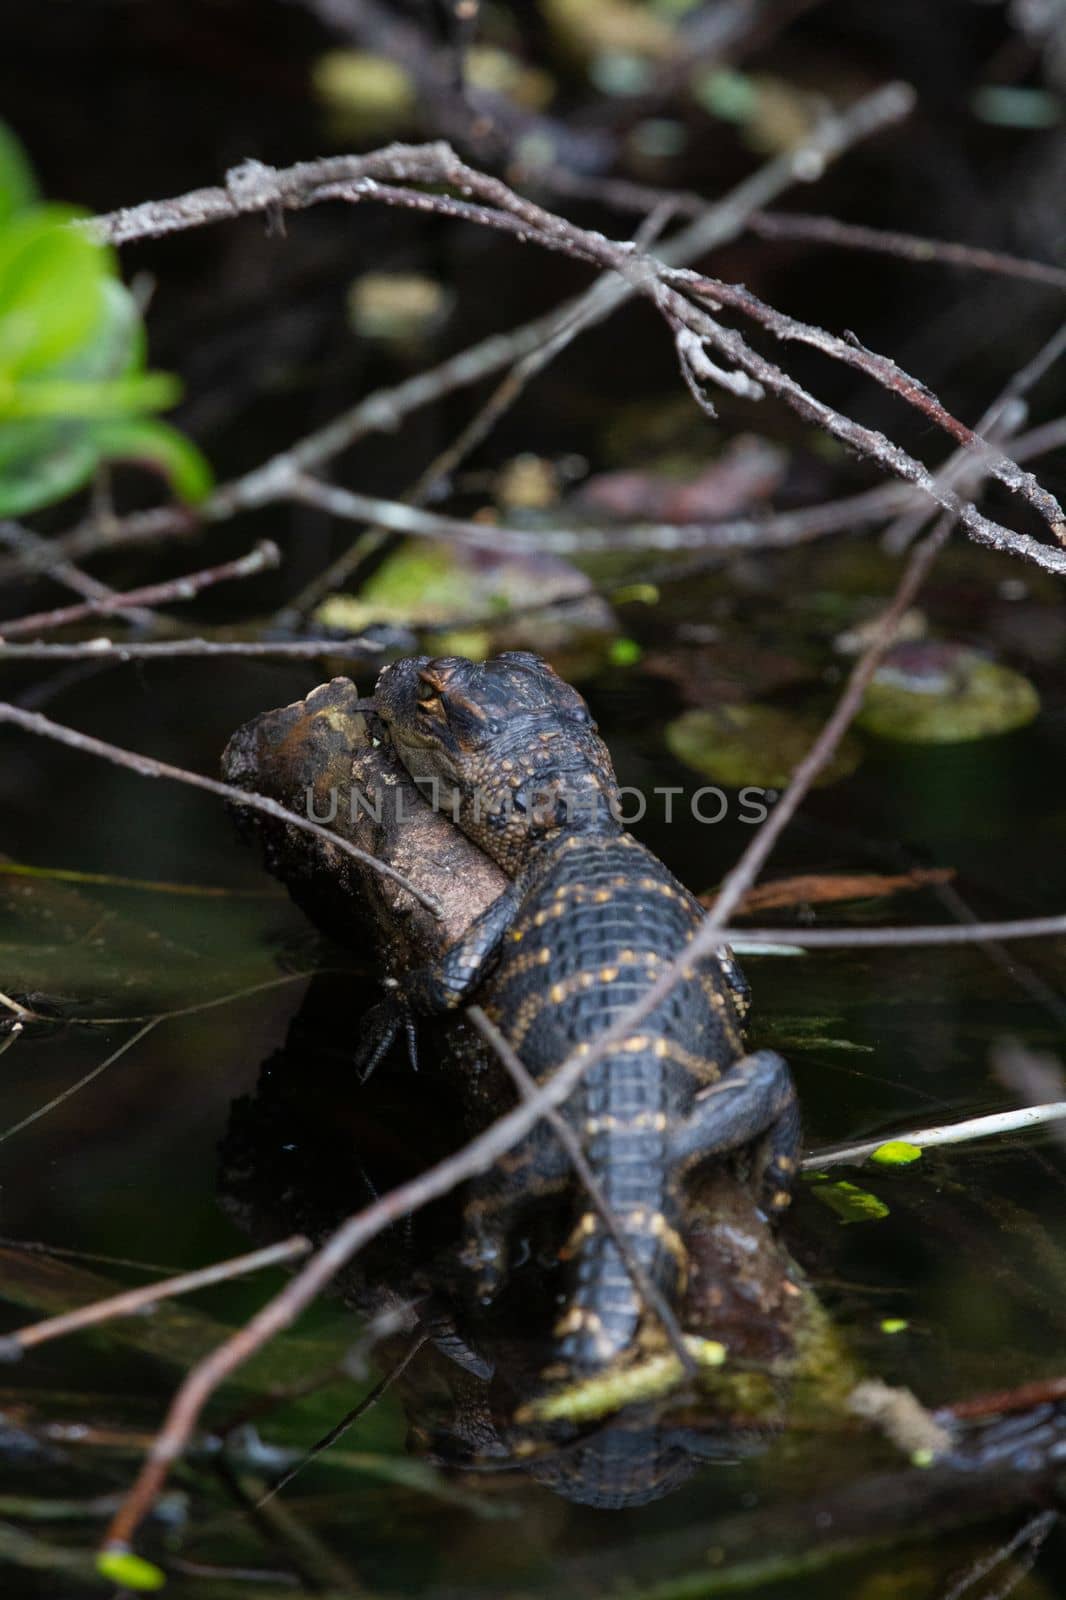 A young American alligator hiding between plants and sleeping, Florida, United States